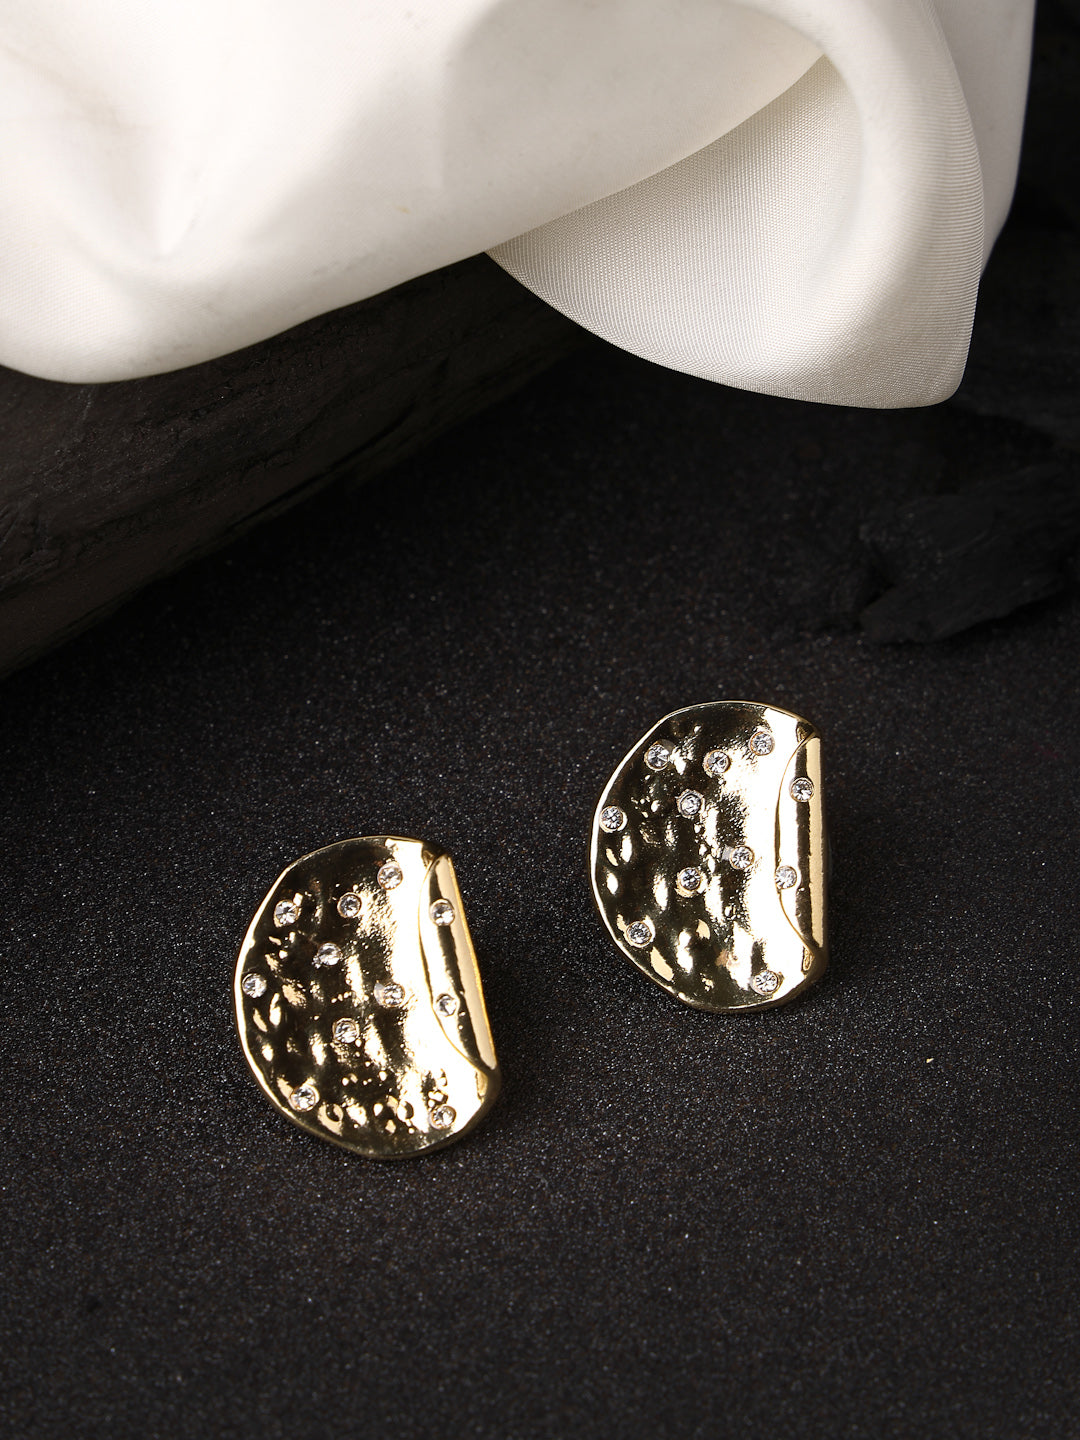 Women's Gold-Plated Contemporary Studs Earrings - NVR